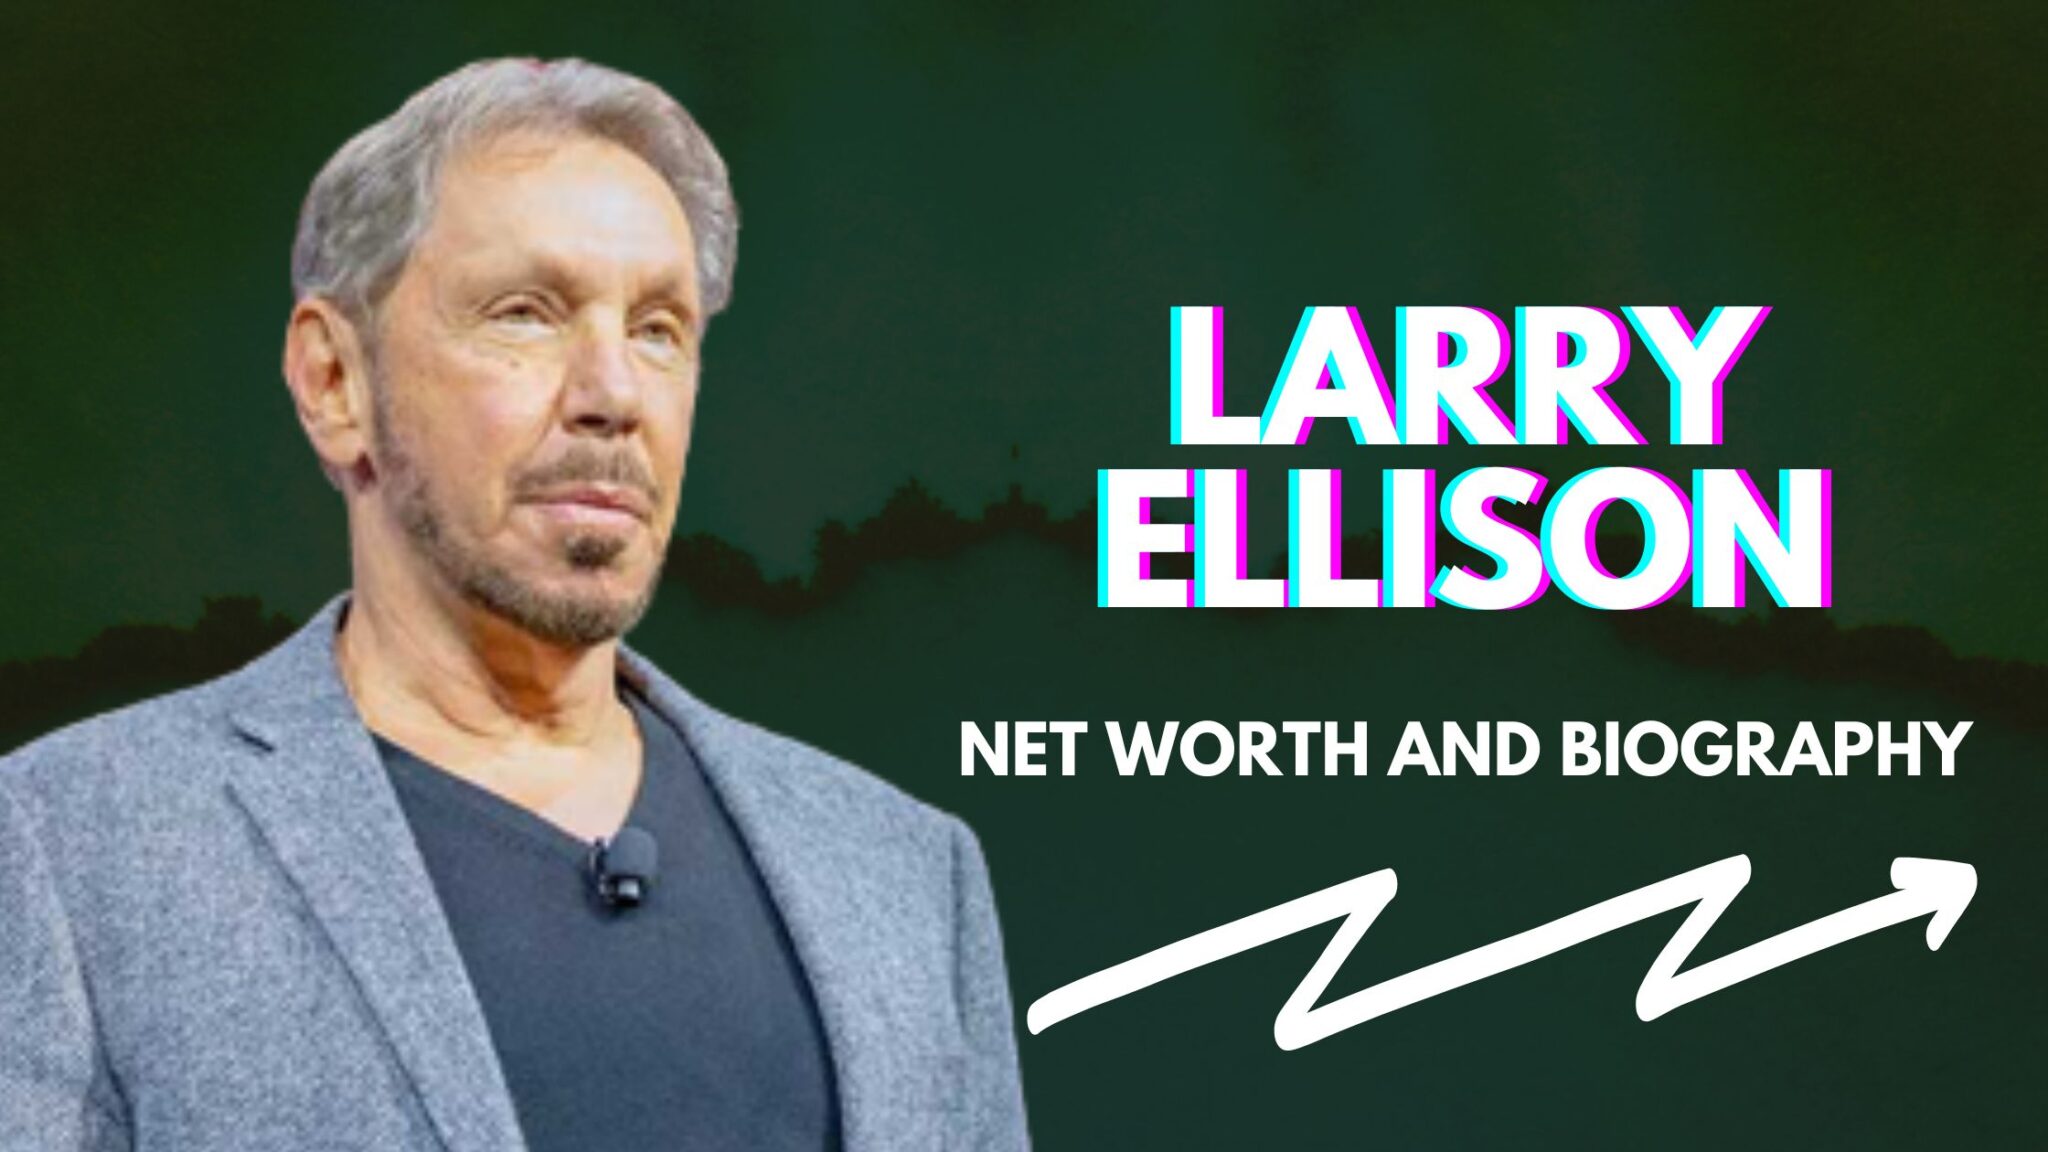 Larry Ellison Net Worth And Biography